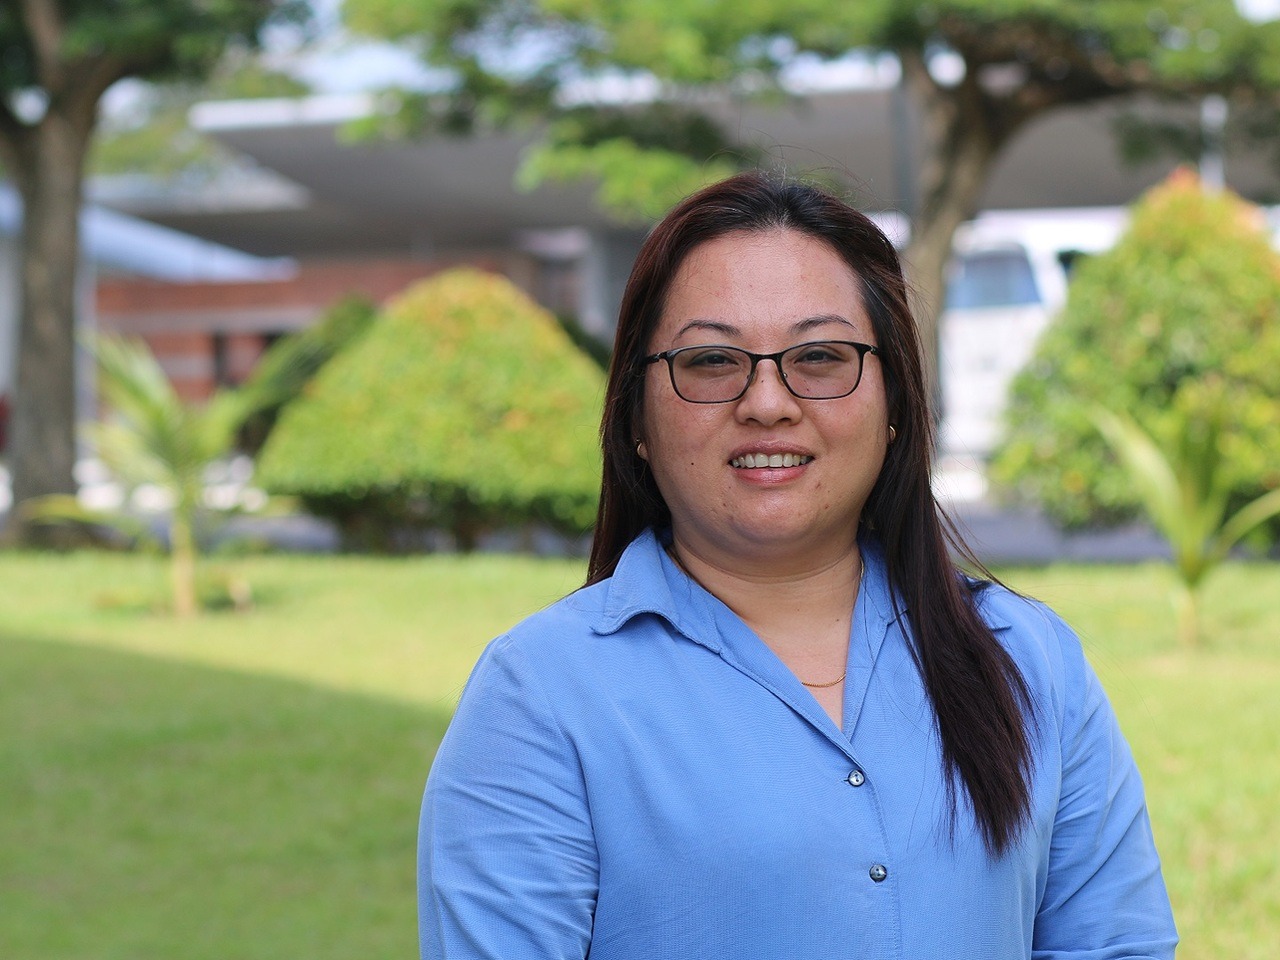 “Being a librarian at Curtin Malaysia has been an interesting journey. As I have always loved books, being a librarian allows me to live my hobby. “Some people say libraries are more than just about books; it’s about connecting with people too....